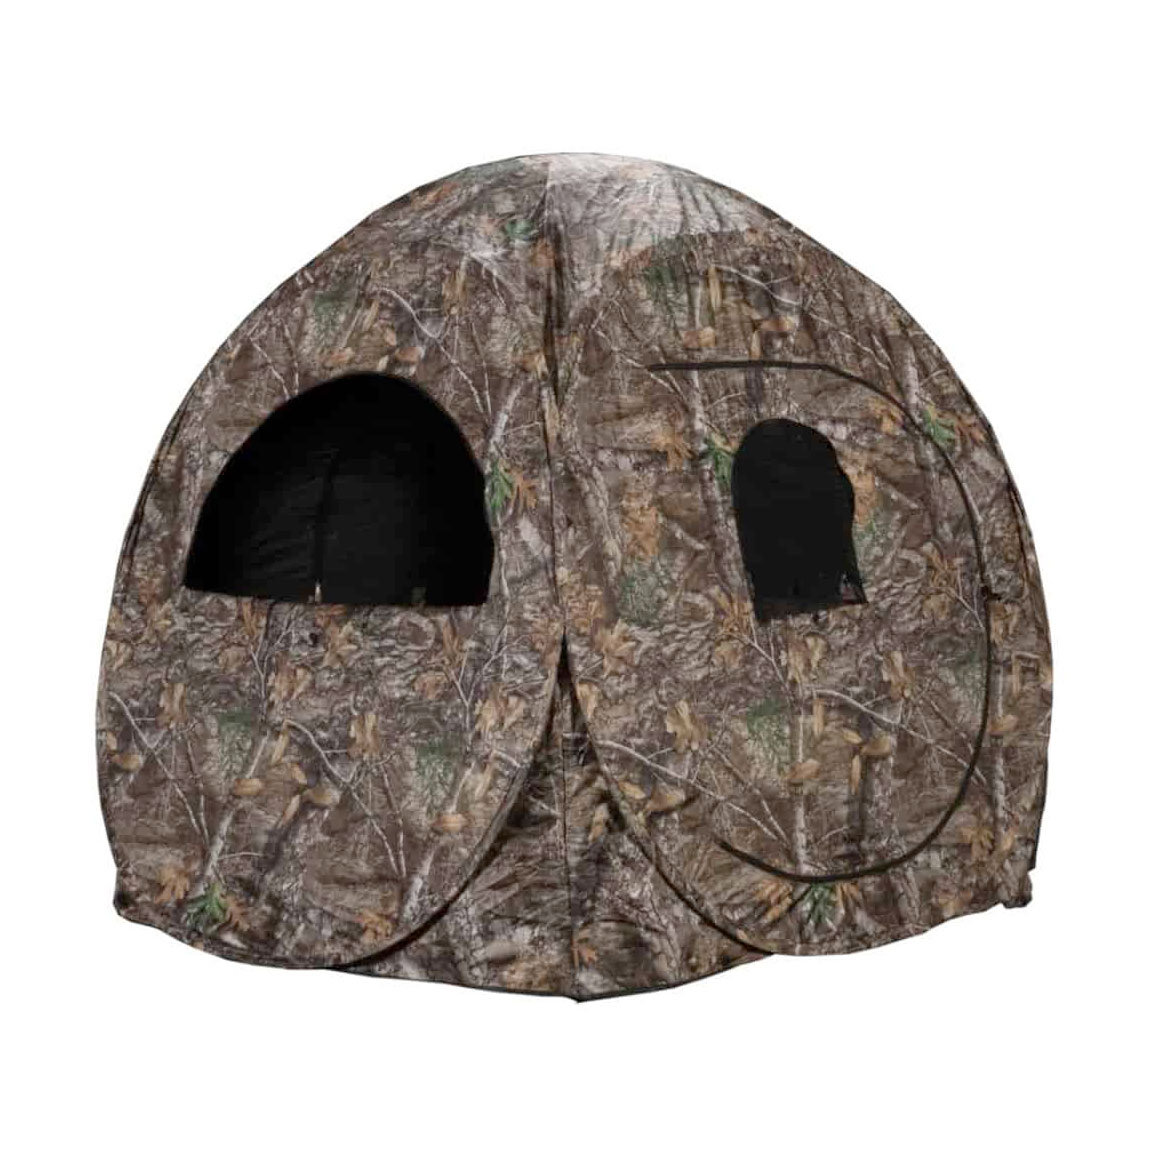 Rhino Hunting Ground Blinds 50-60% Off With Free Shipping! R-75 Realtree Edge Spring Steel Blind $39.99(50% off) and R180 See-Through Blind True Timber Kanati $79.99(60% off)